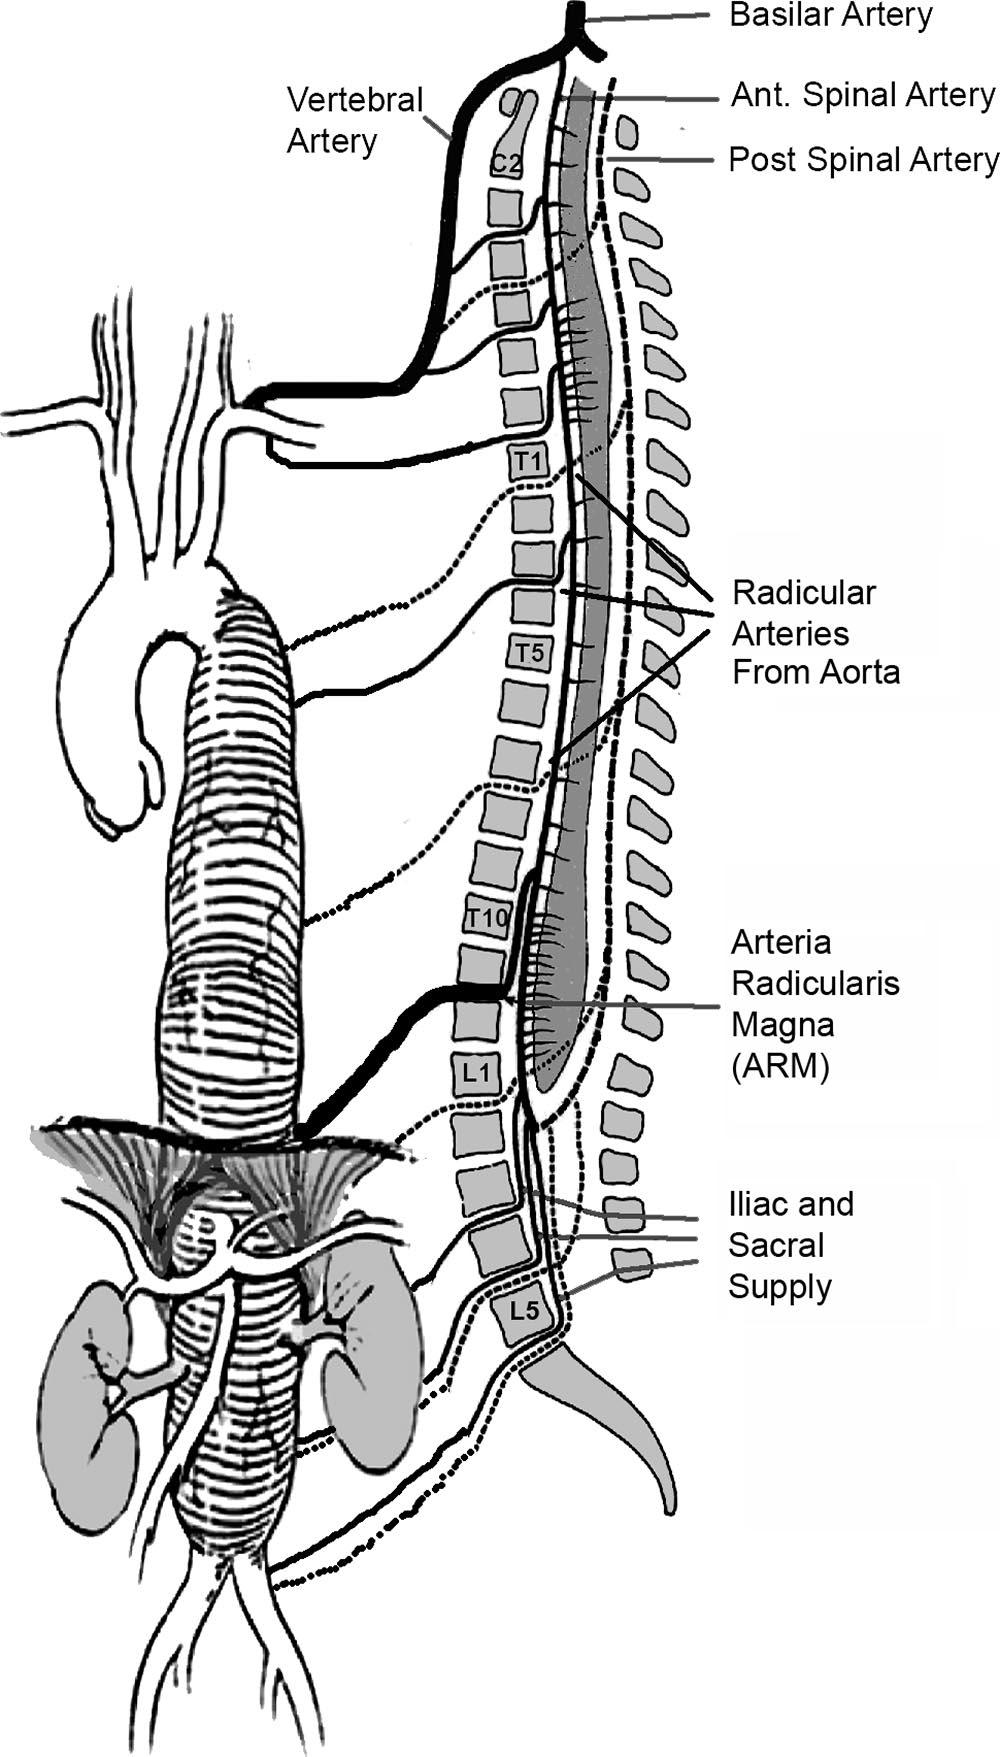 The aneurysm does not extend into the abdomen and may not involve the Arteria radicularis magna (ARM).